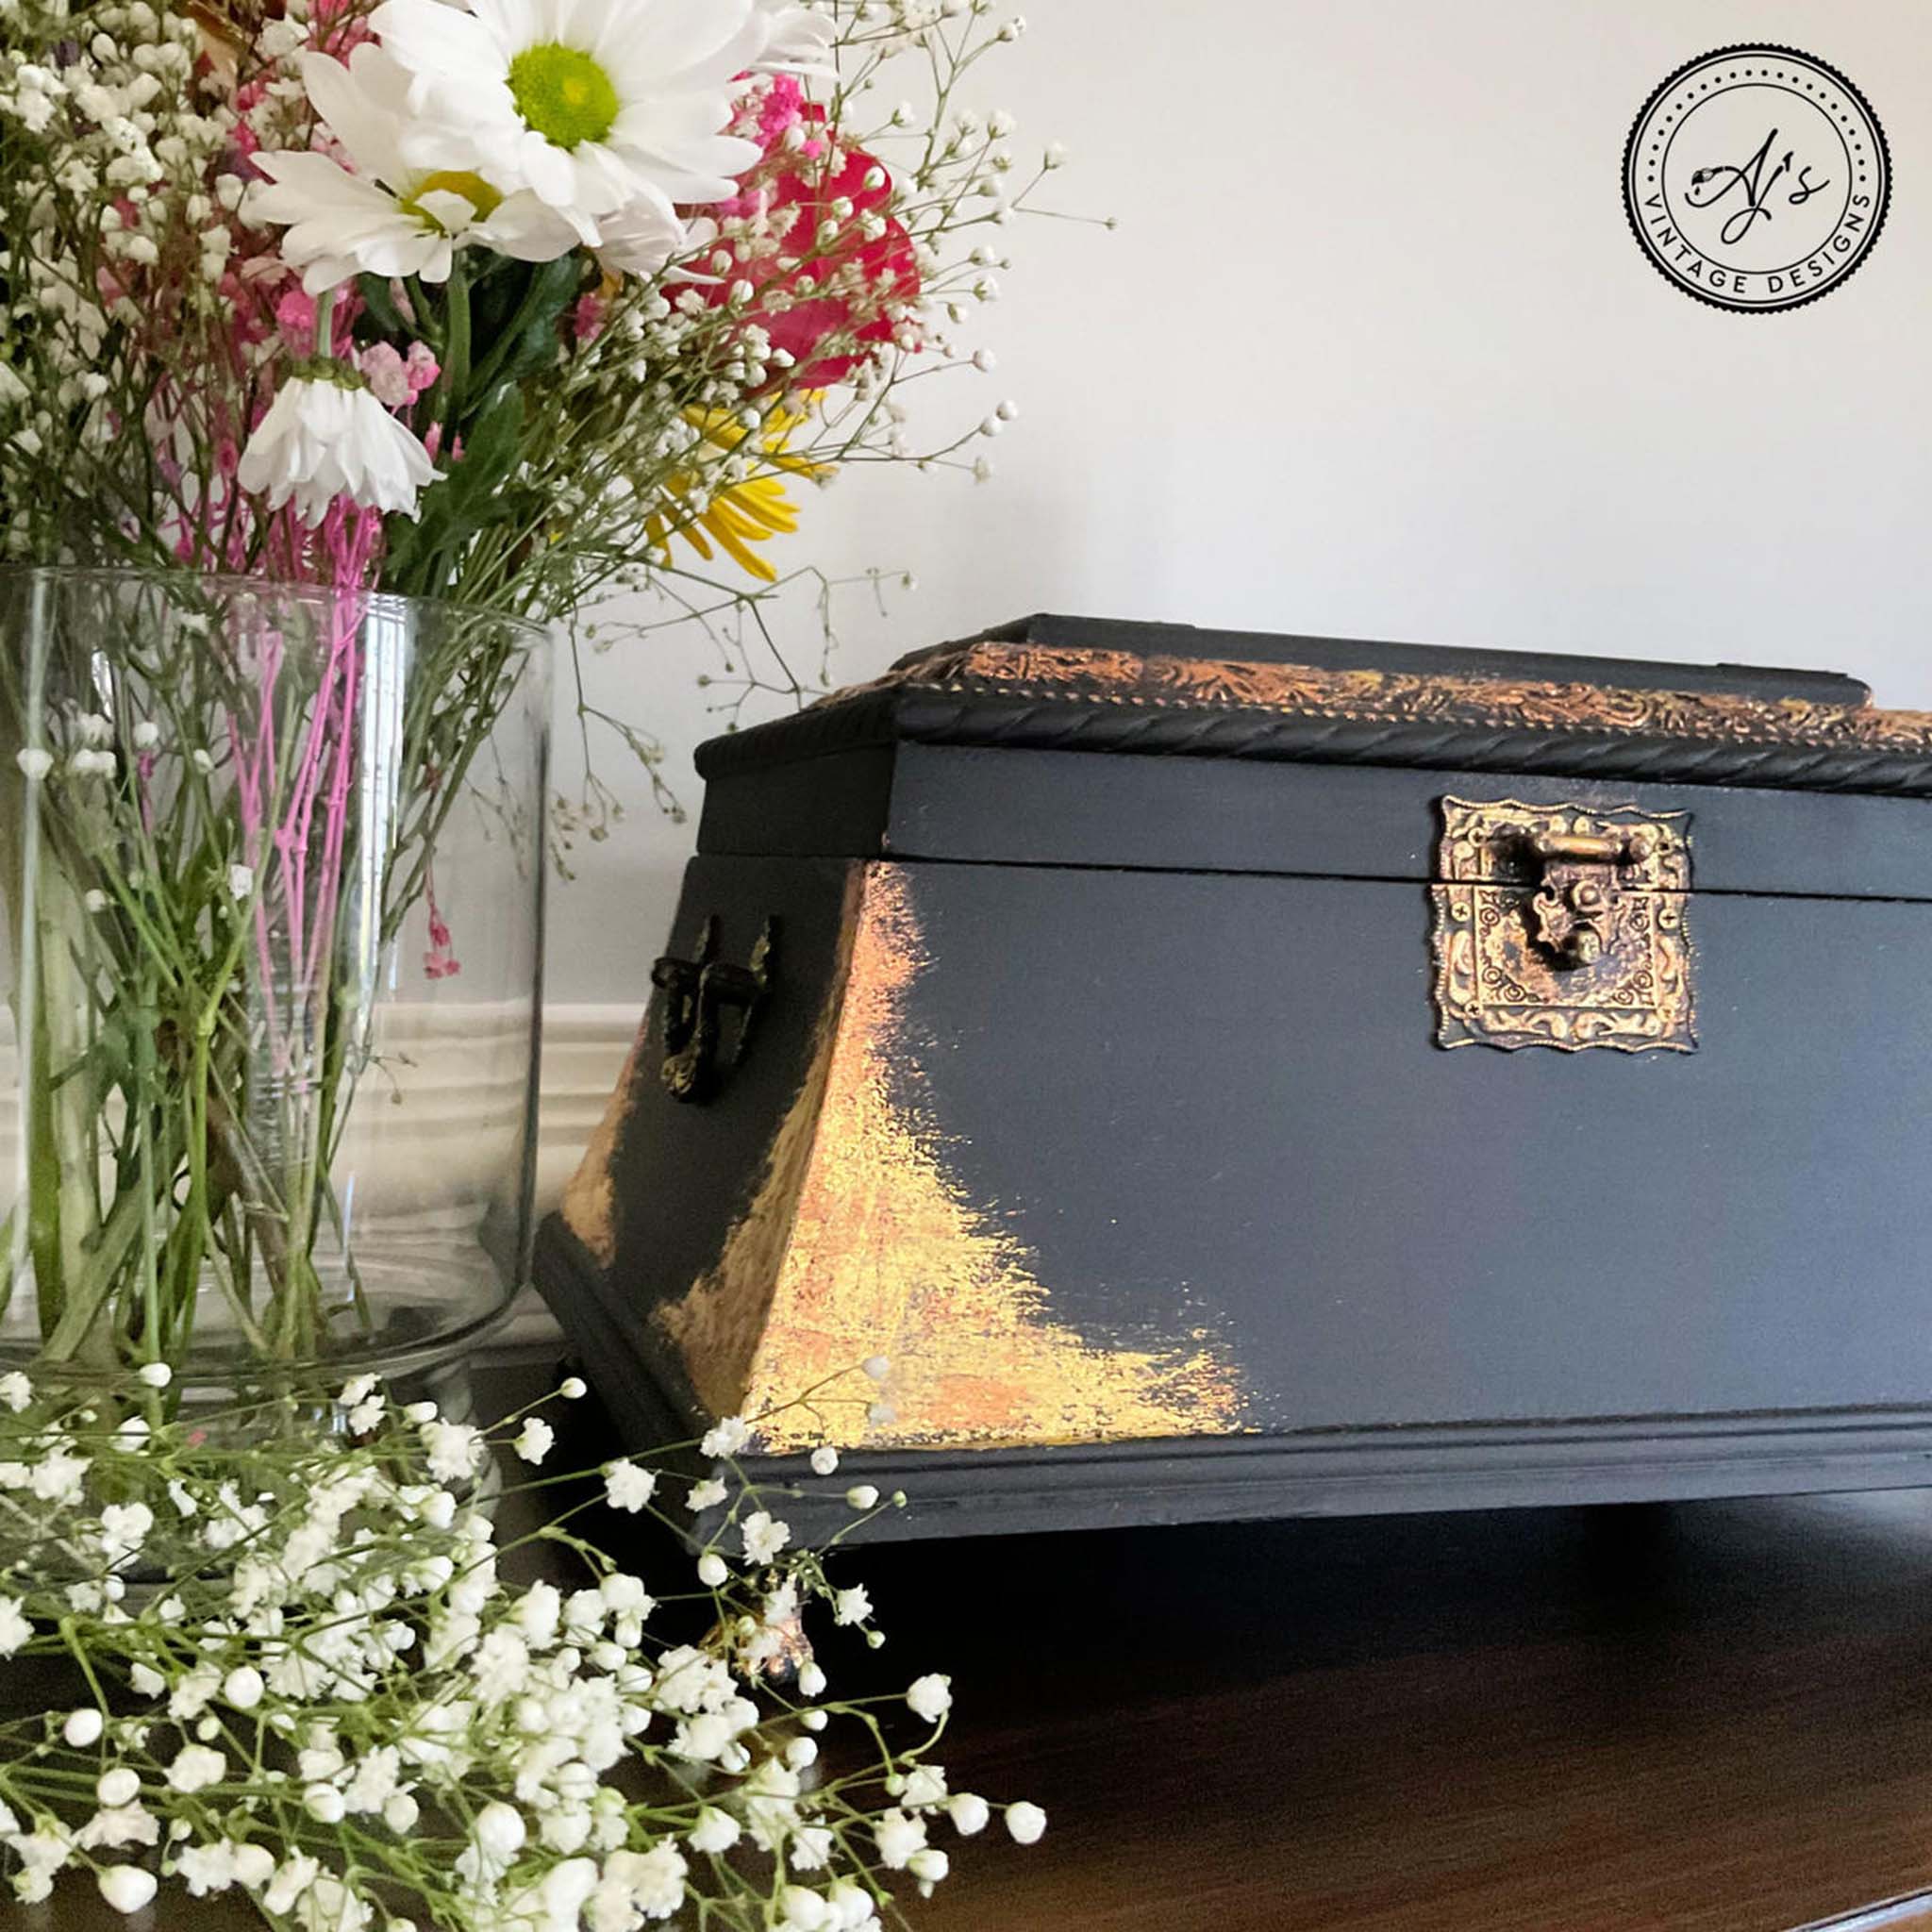 A small vintage box refurbished by Aj's Vintage Designs is painted black with Dixie Shine gold foil on the corners. To the left is a glass vase with small wildflowers in it.